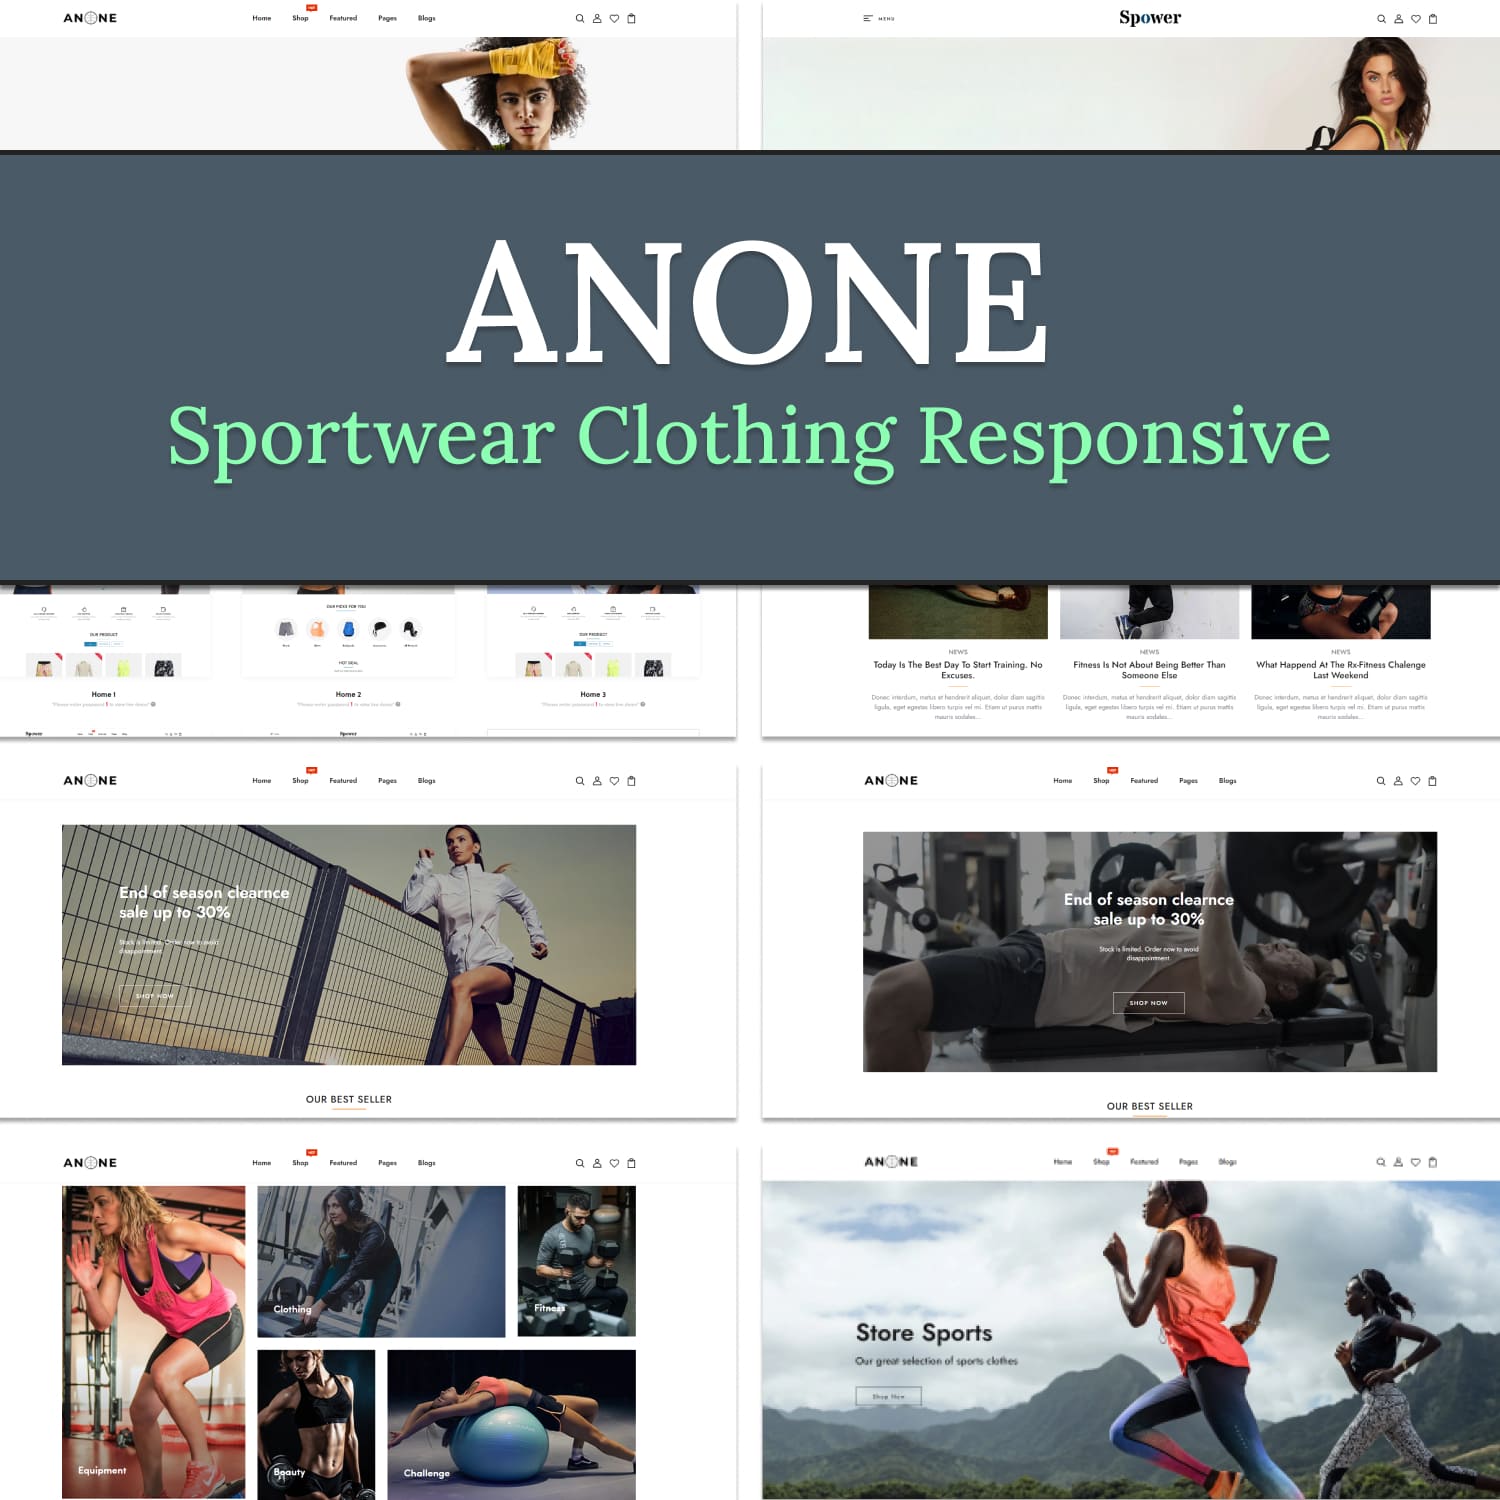 Anone sportwear clothing responsive.